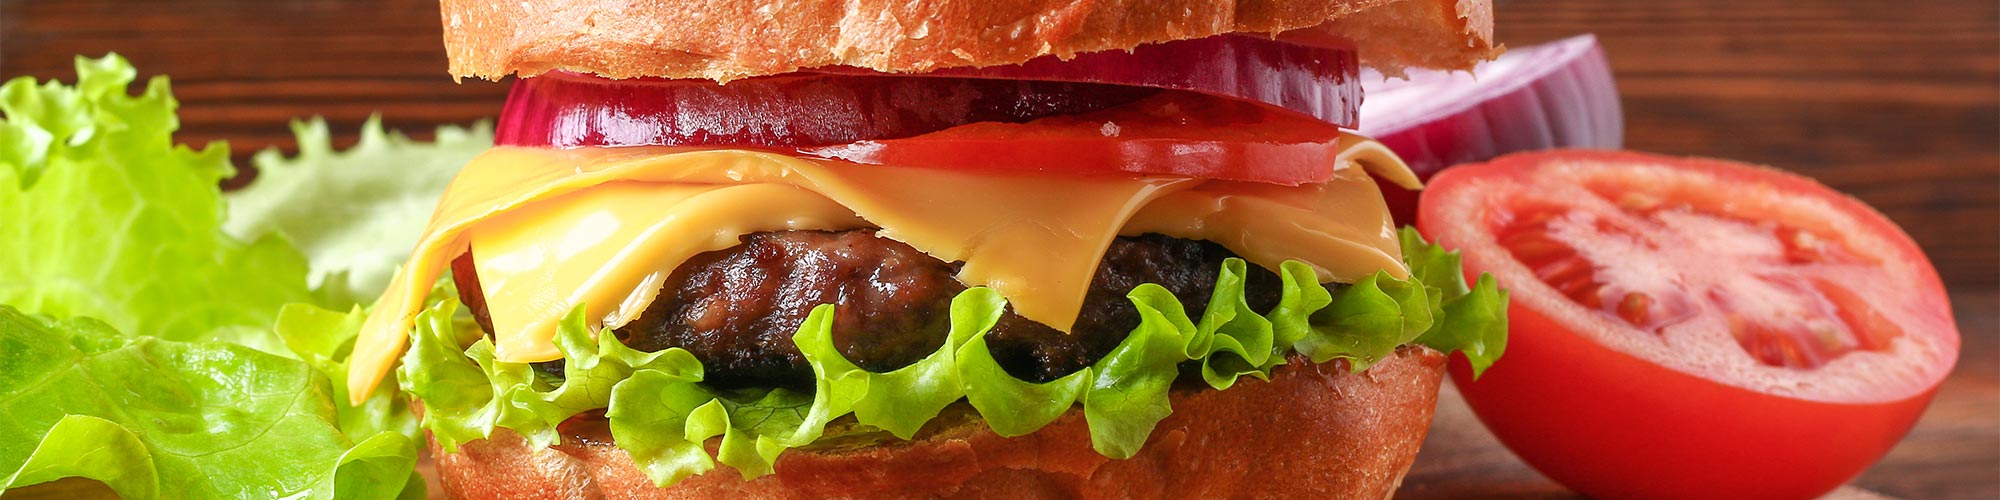 Delicious cheese burger with lettuce, tomato, and onion.